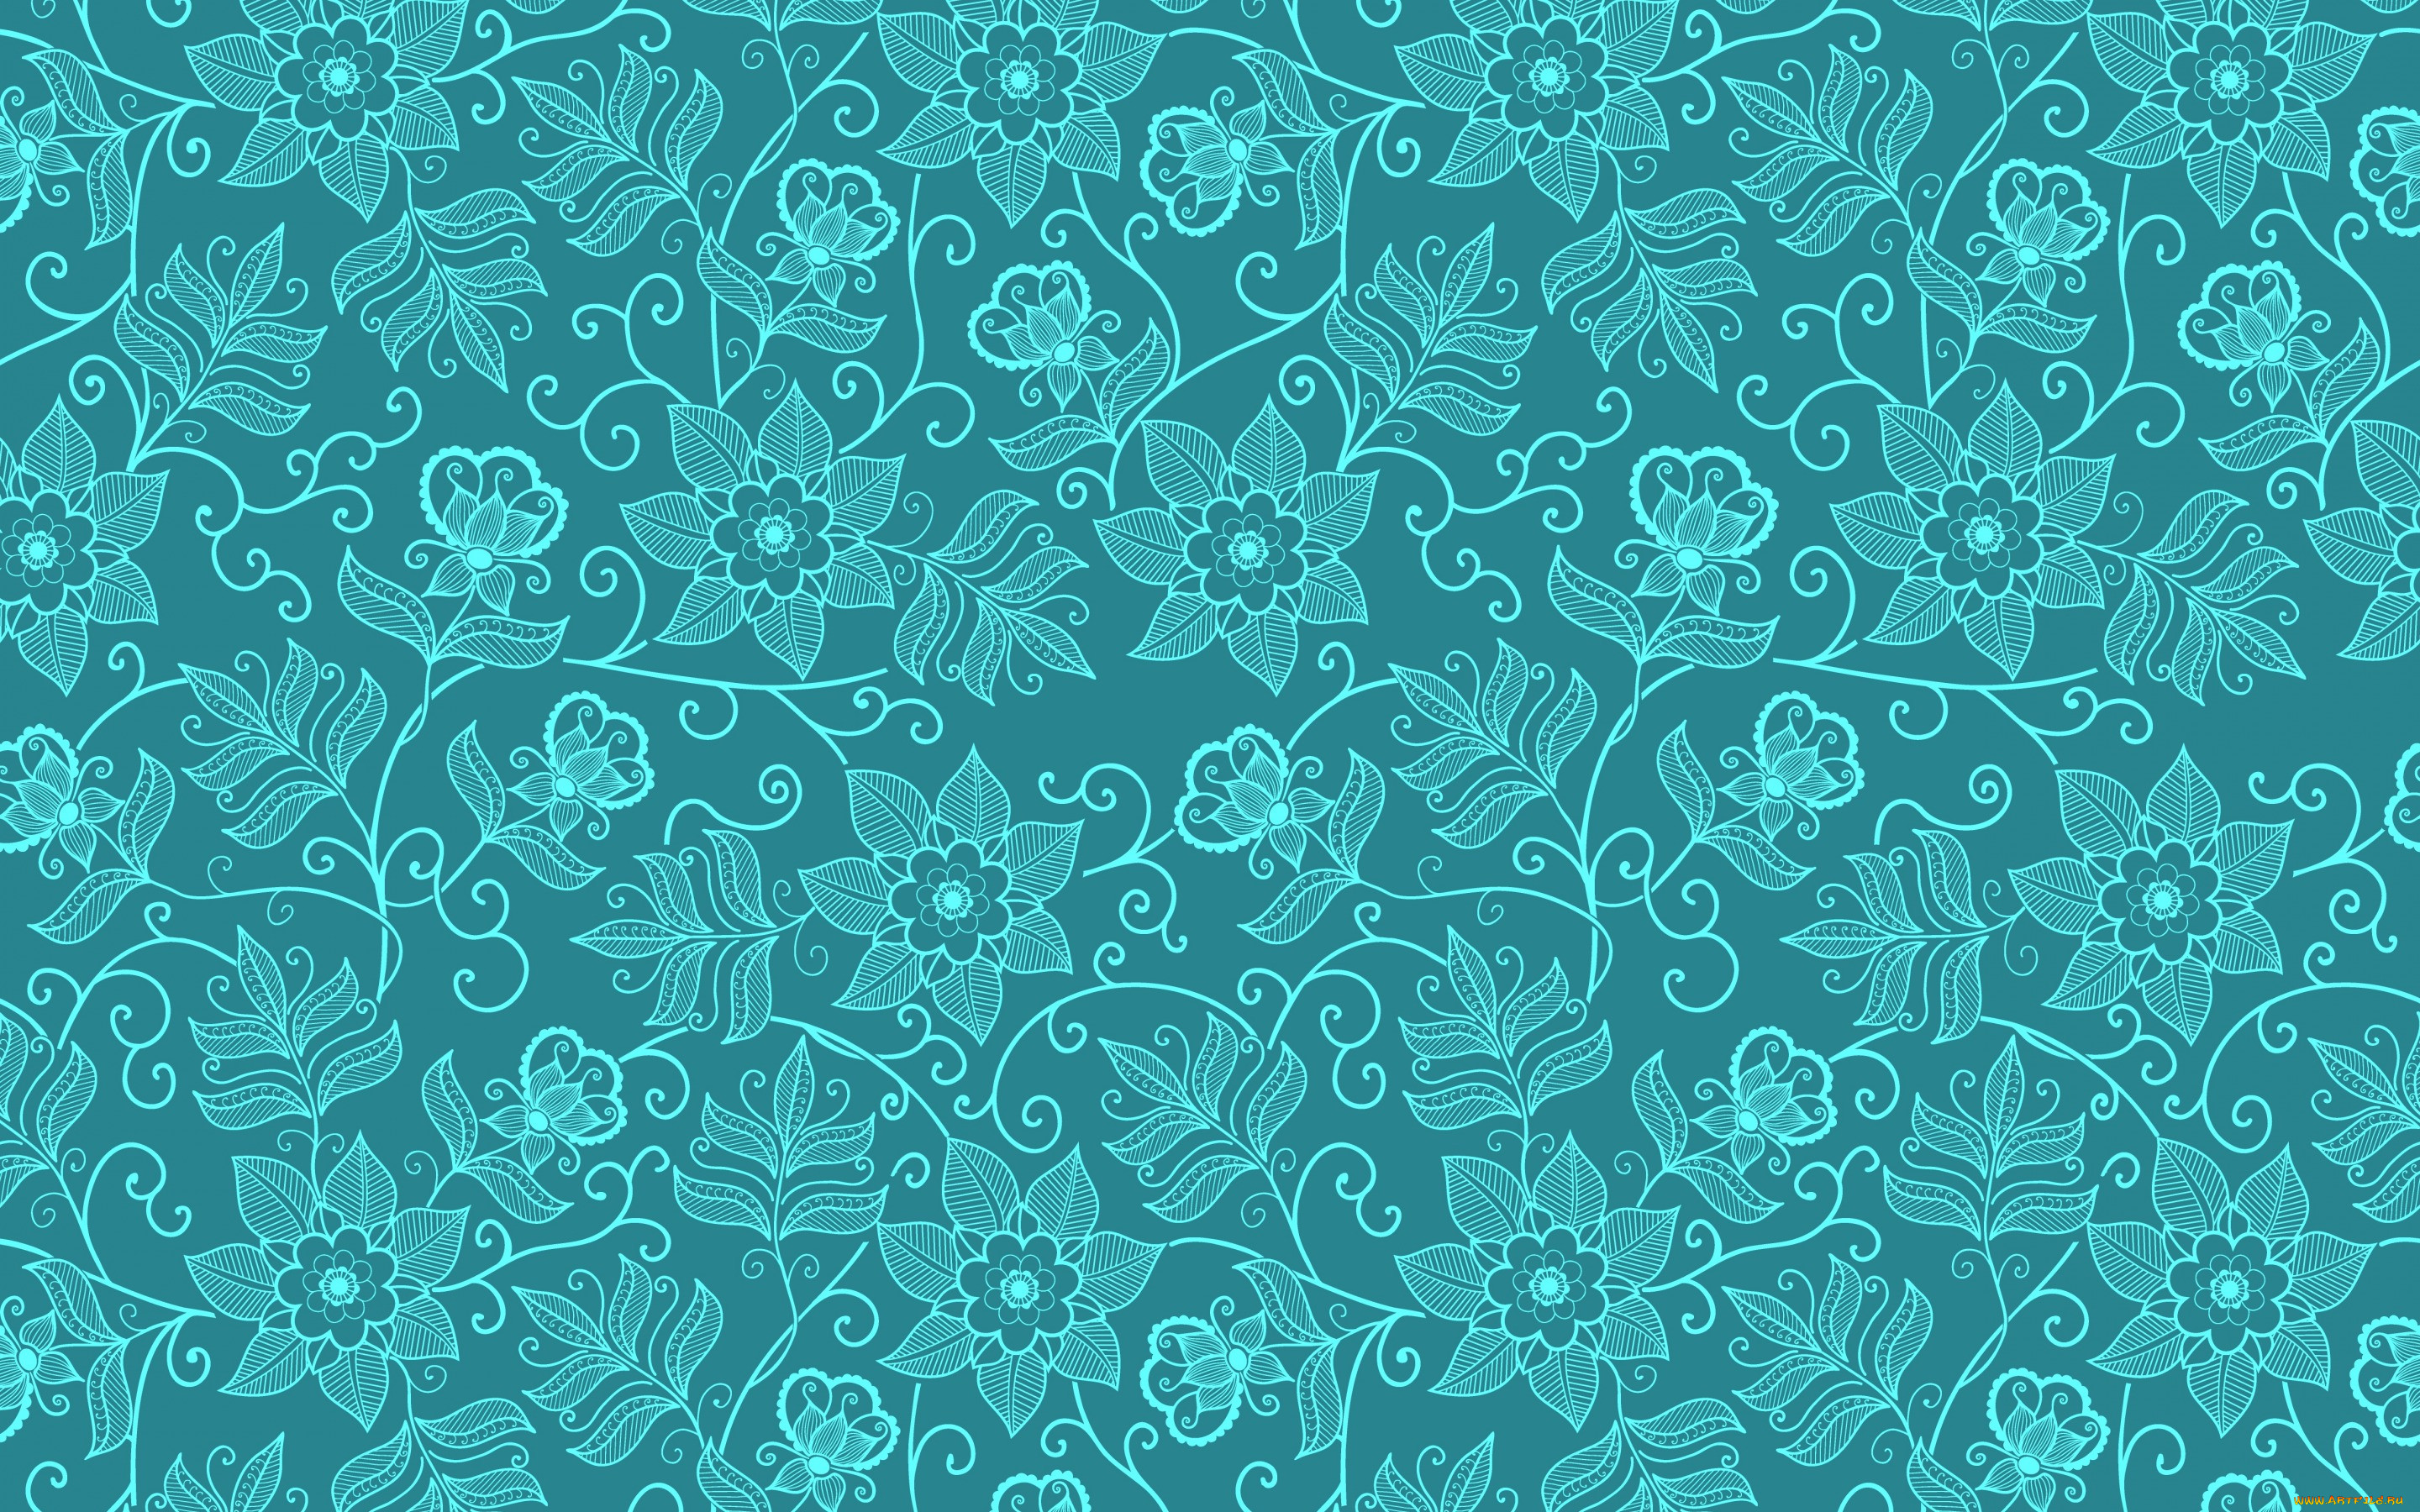  ,  , flowers, background, seamless, flower, pattern, wallpapers, vector, texture, textile